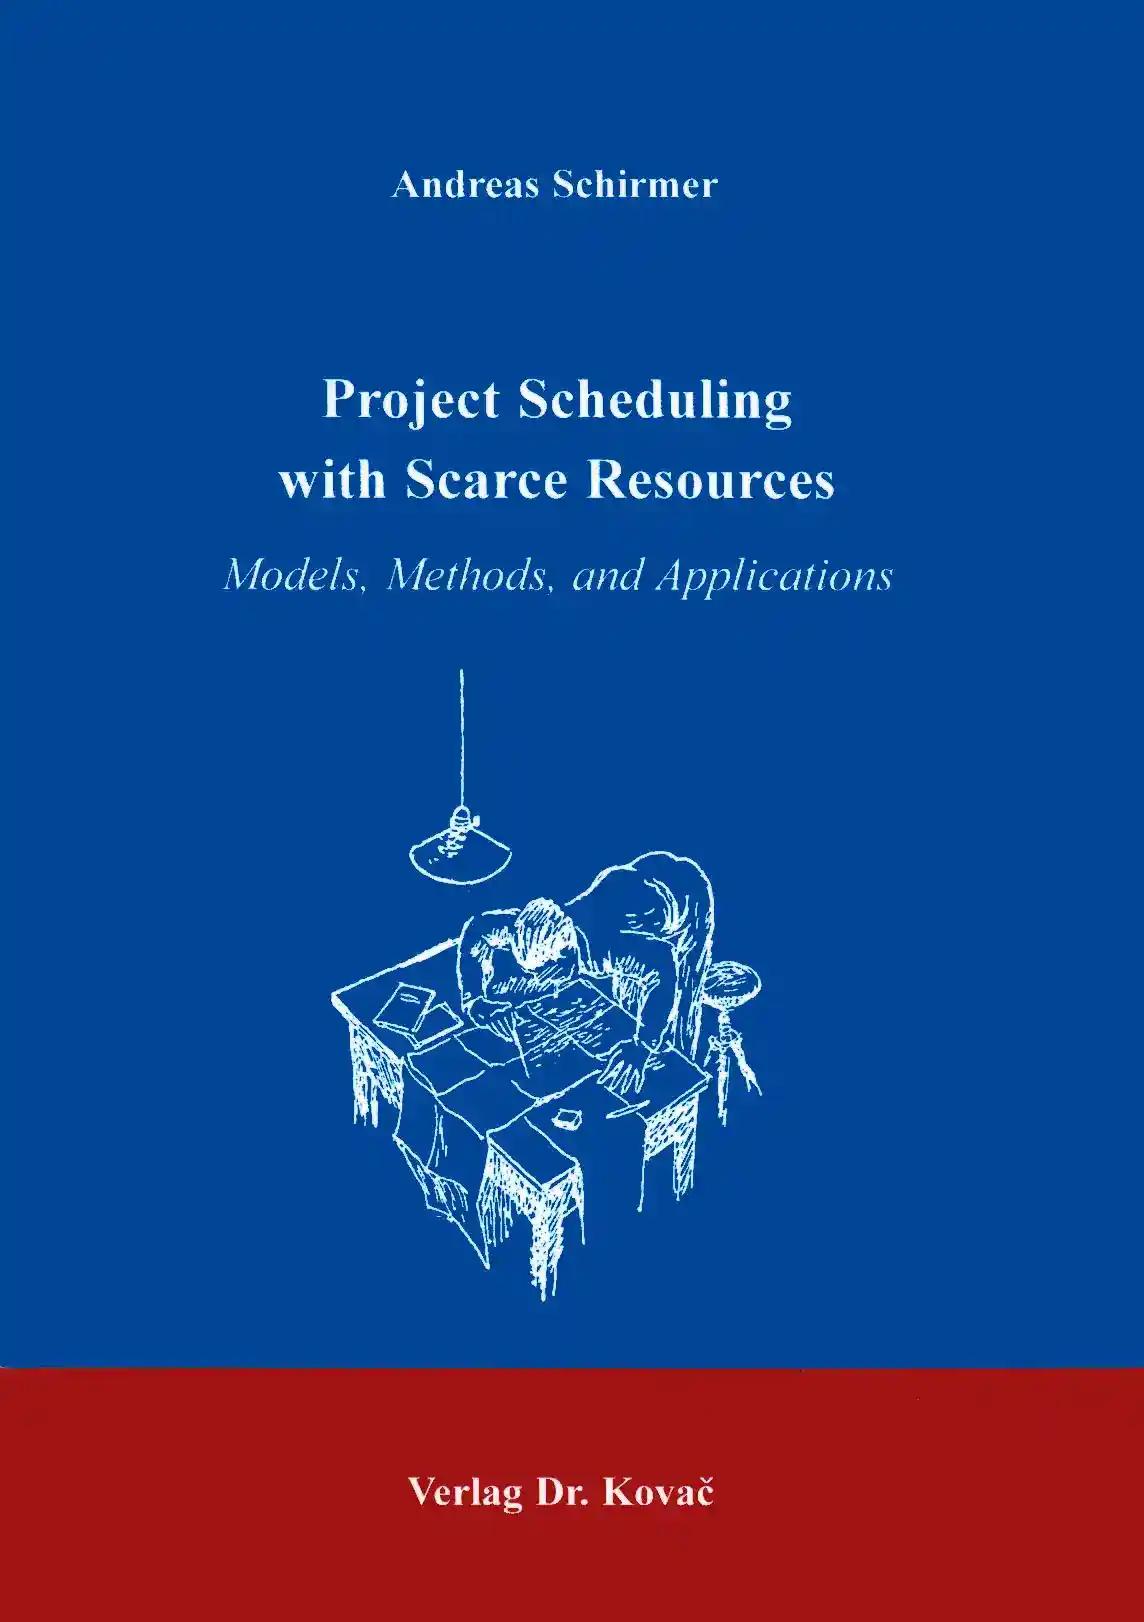 Project Scheduling with Scarce Resources, Models, Methods, and Applications - Andreas Schirmer